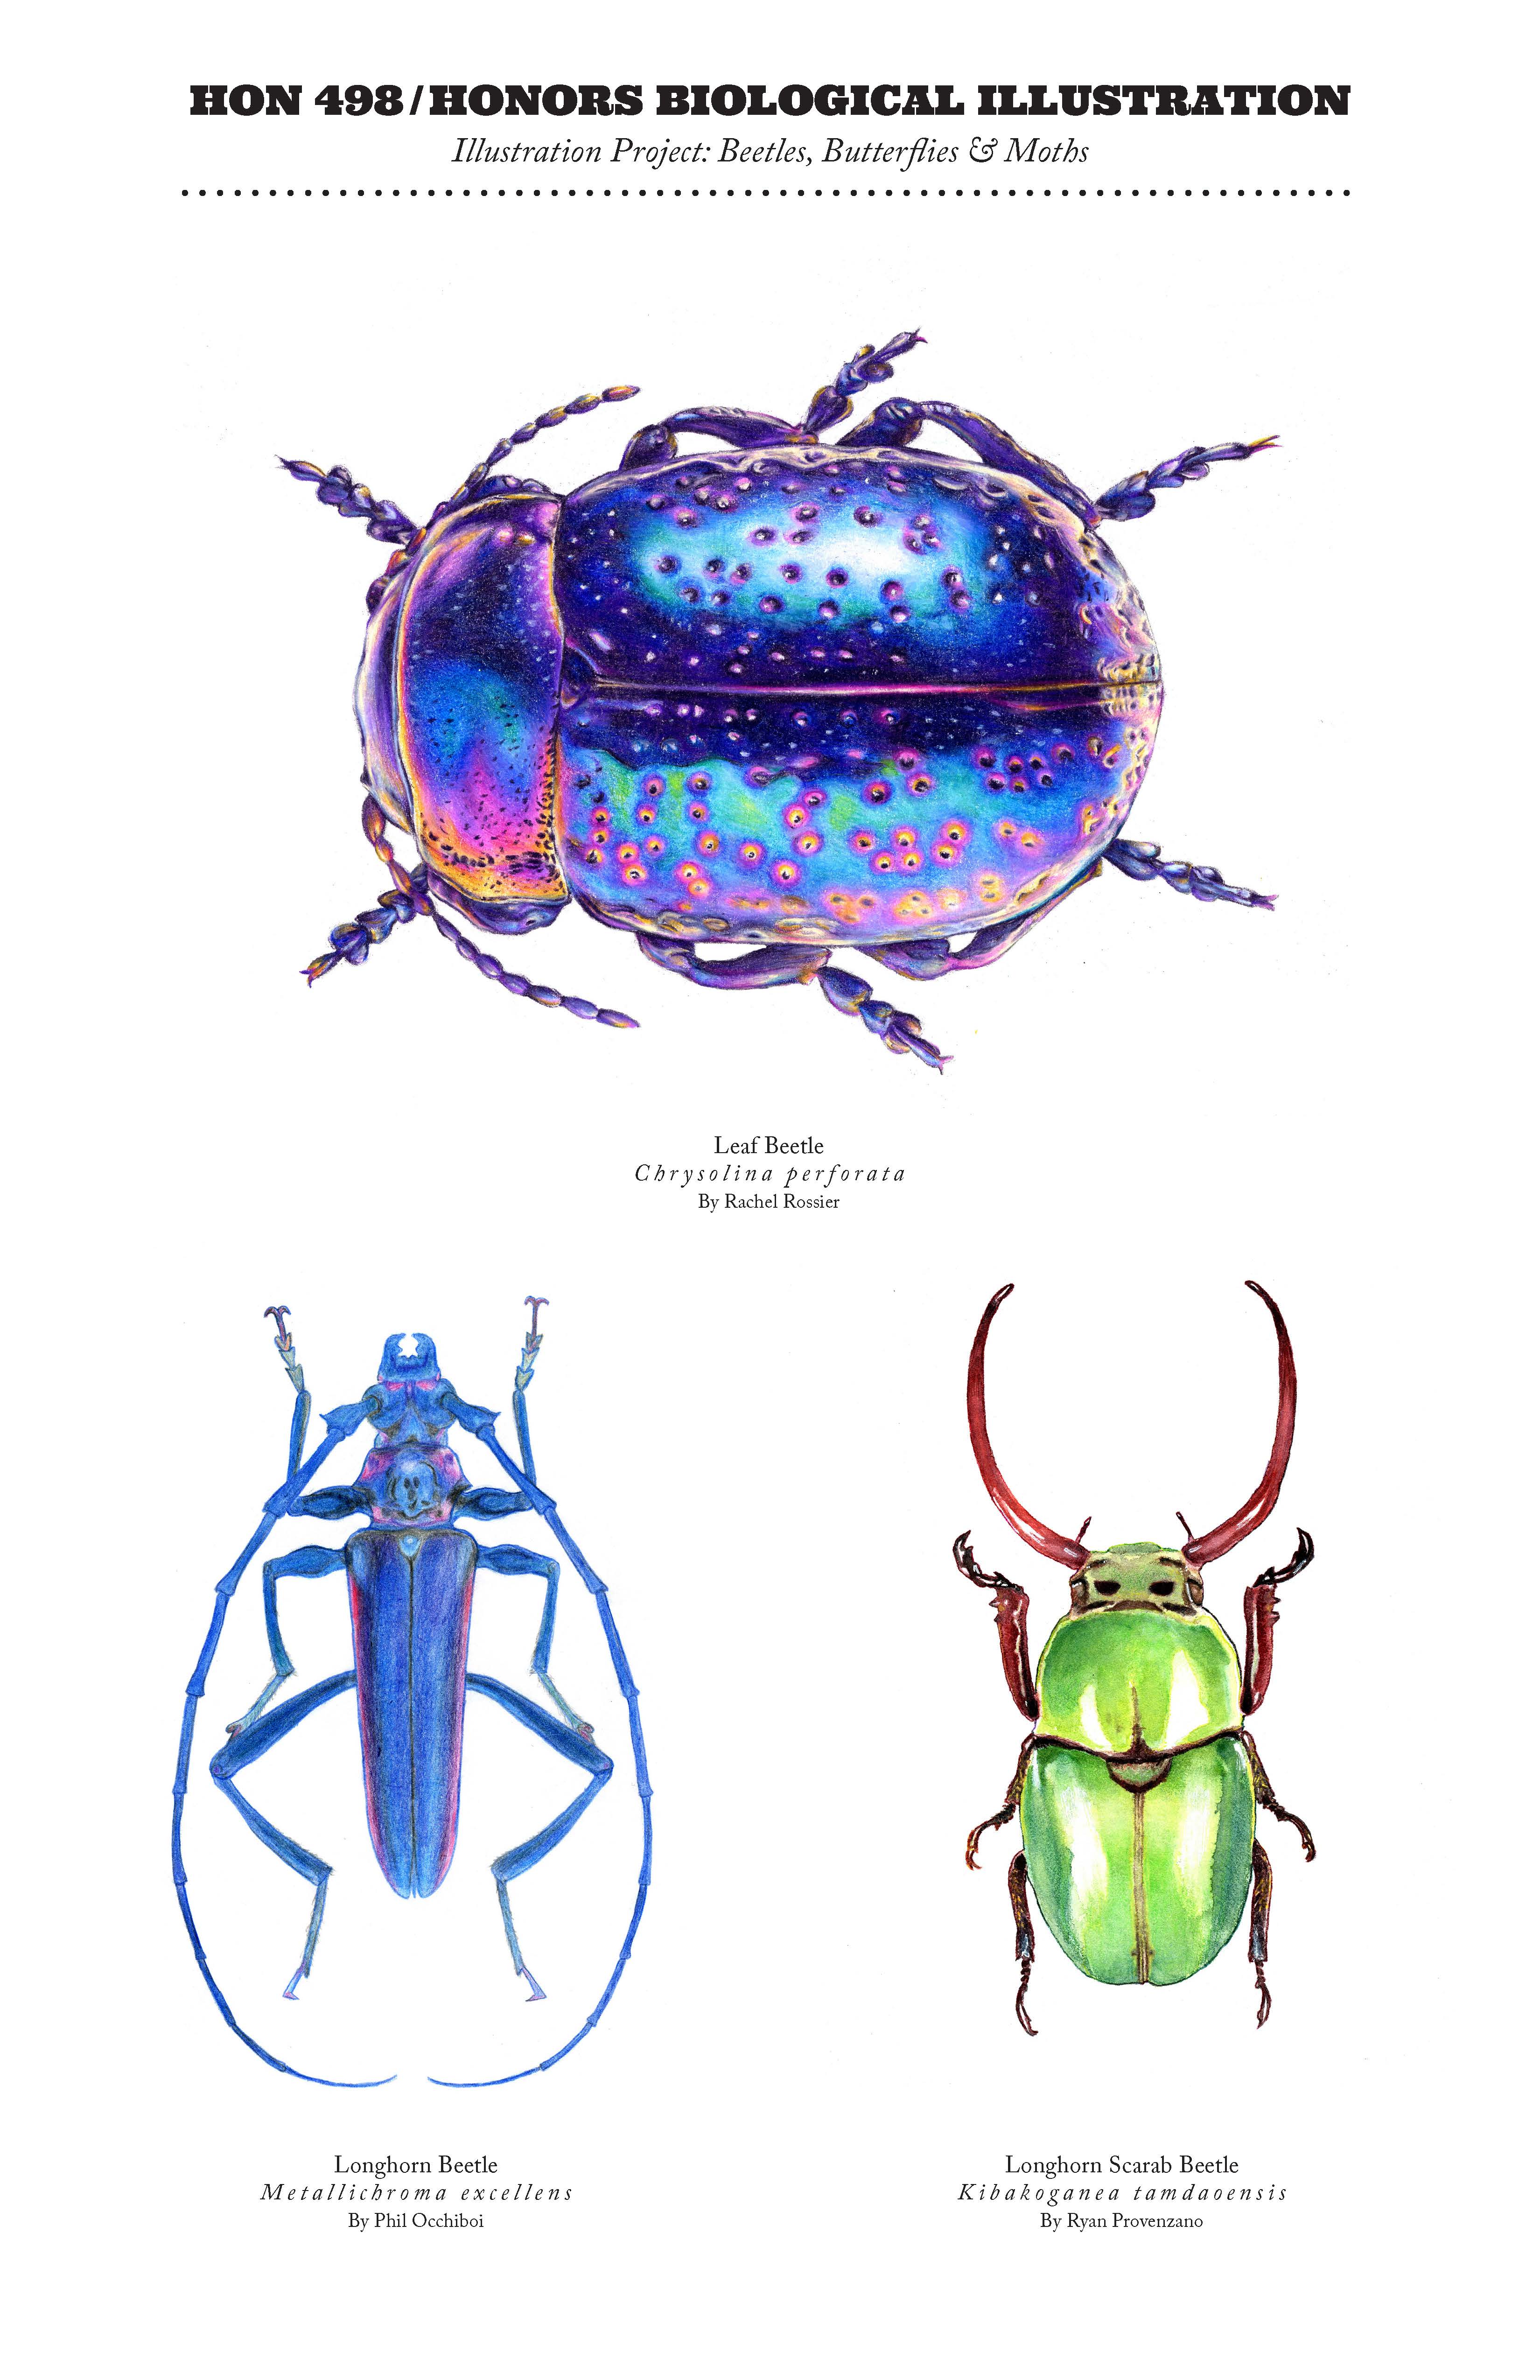 Drawings for Biological Illustration course. A purple and blue beetle with pink spots is on the top. There is a blue beetle with very long antennae on the bottom left. There is a green scarab beetle with long antennae on the bottom right.